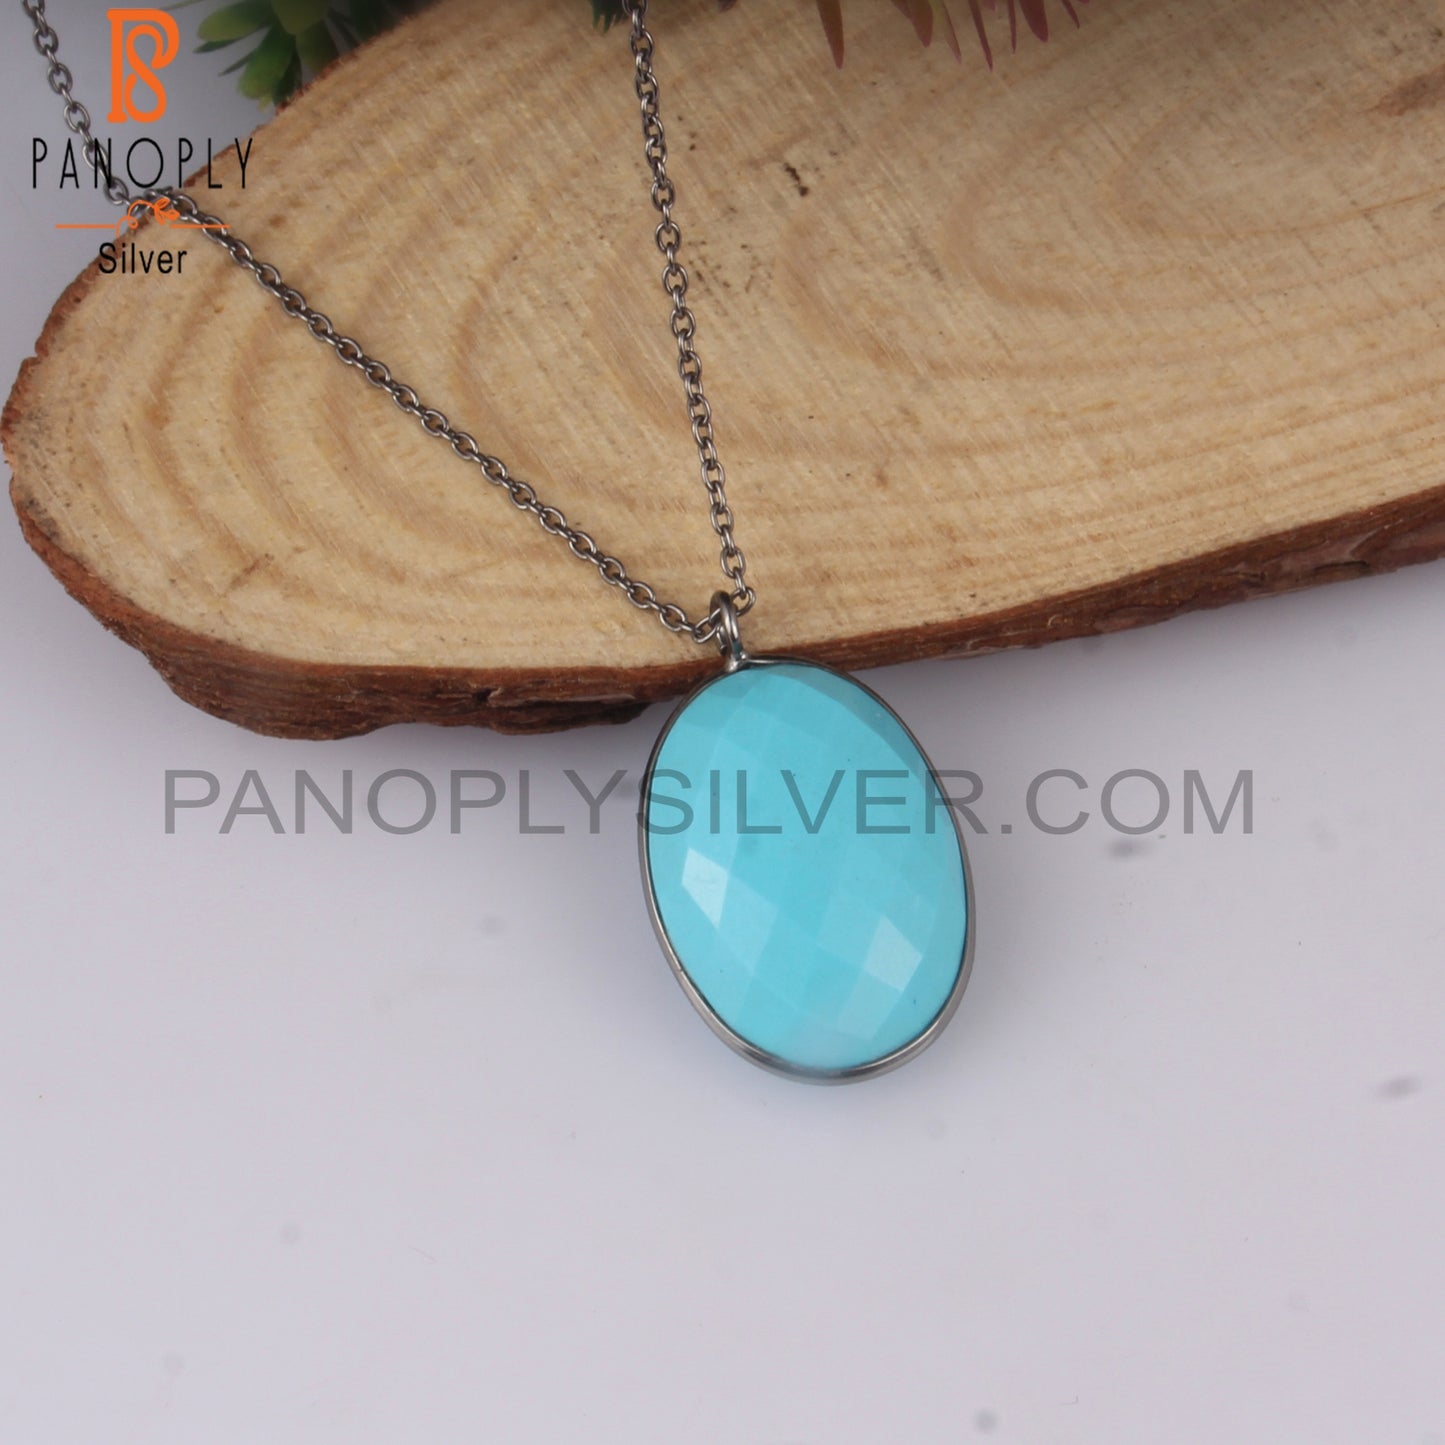 Turquoise Cultured 925 Sterling Silver Pendant With Chain